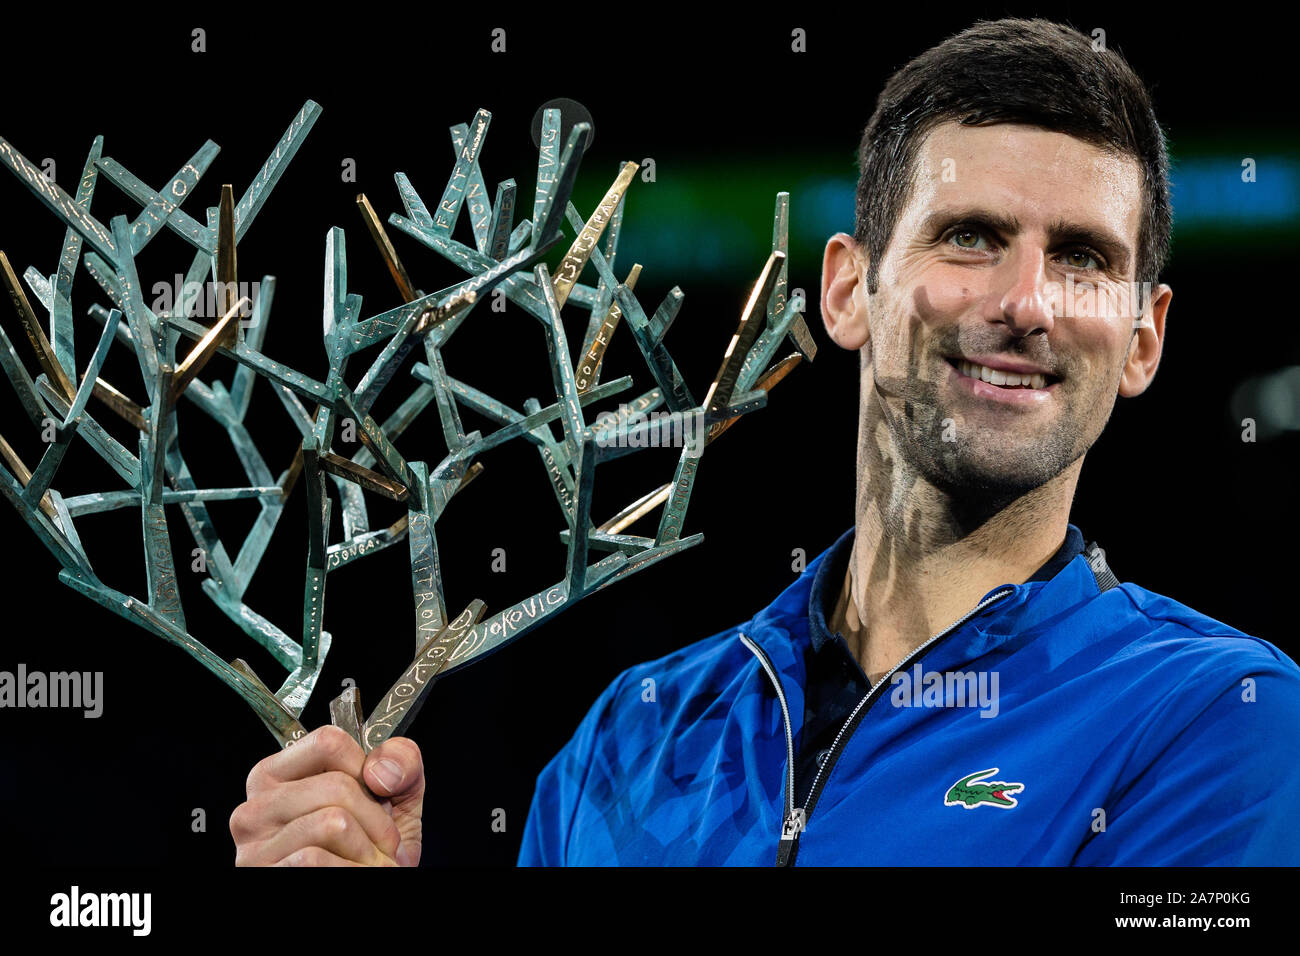 Paris, France. 3rd Nov, 2019. Novak Djokovic of Serbia poses with the  trophy after the final match against Denis Shapovalov of Canada at the Rolex  Paris Masters 1000 held at the AccorHotels